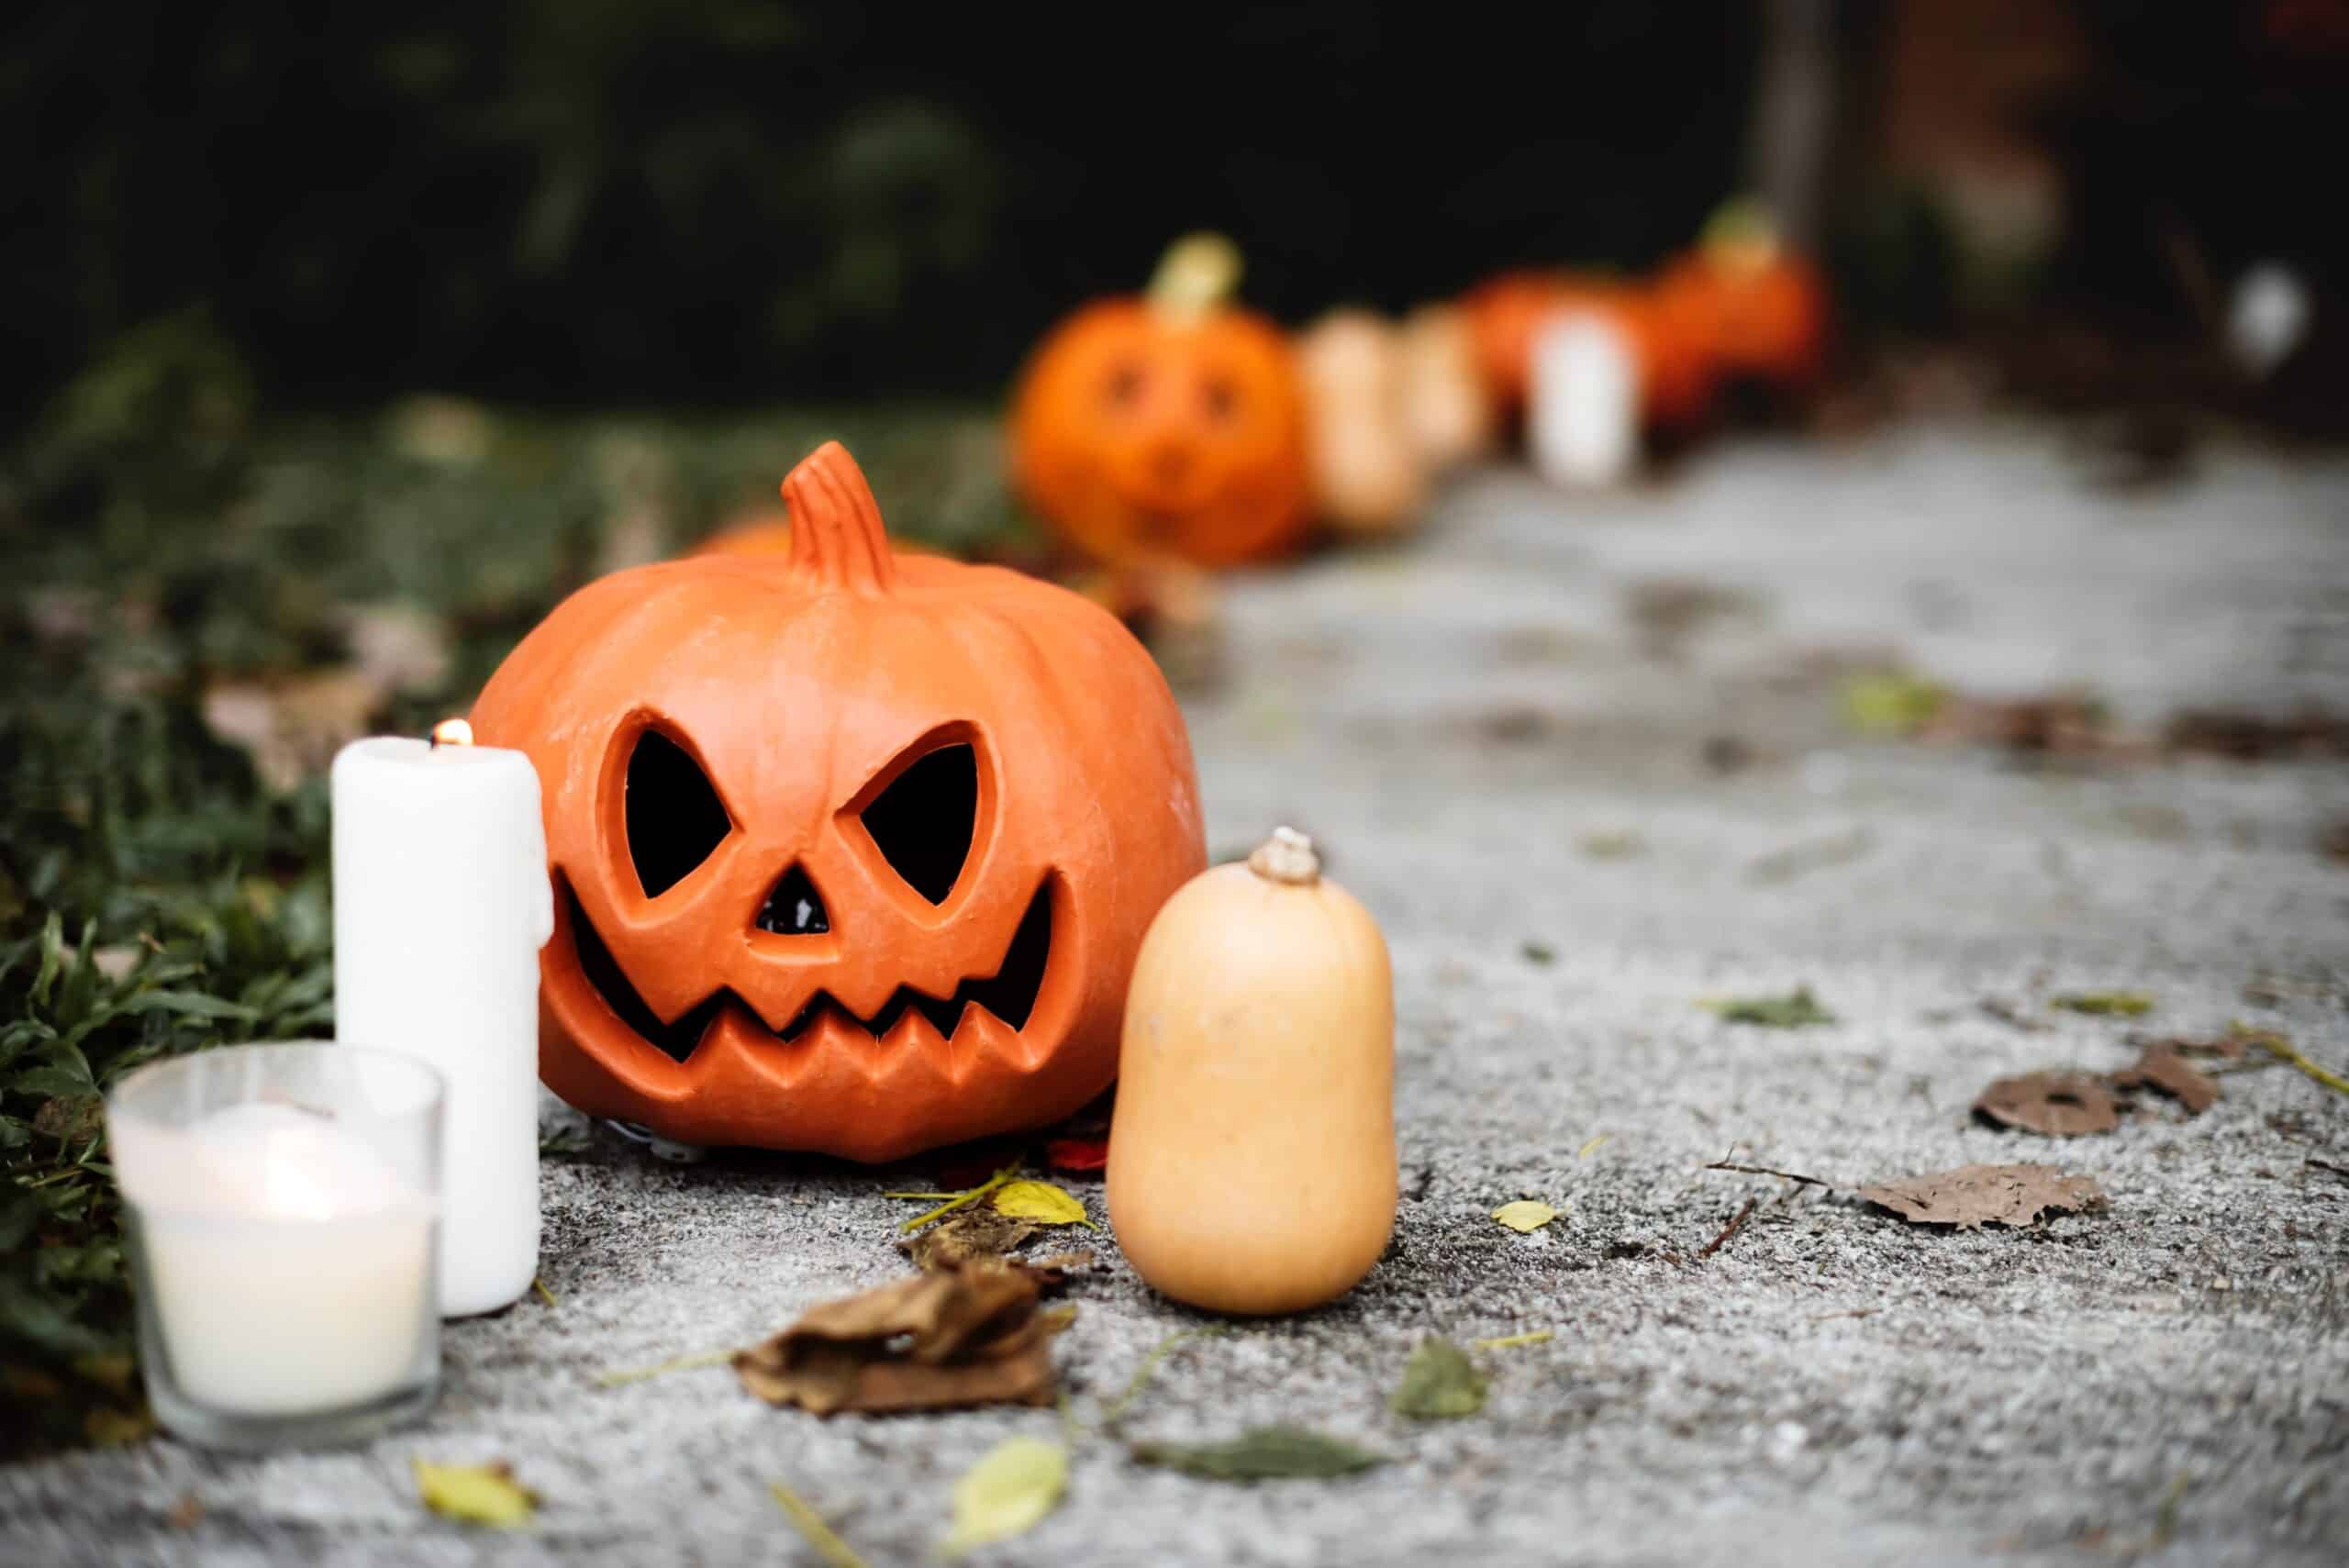 5 Halloween Decorating Tips for the Scariest House on the Block